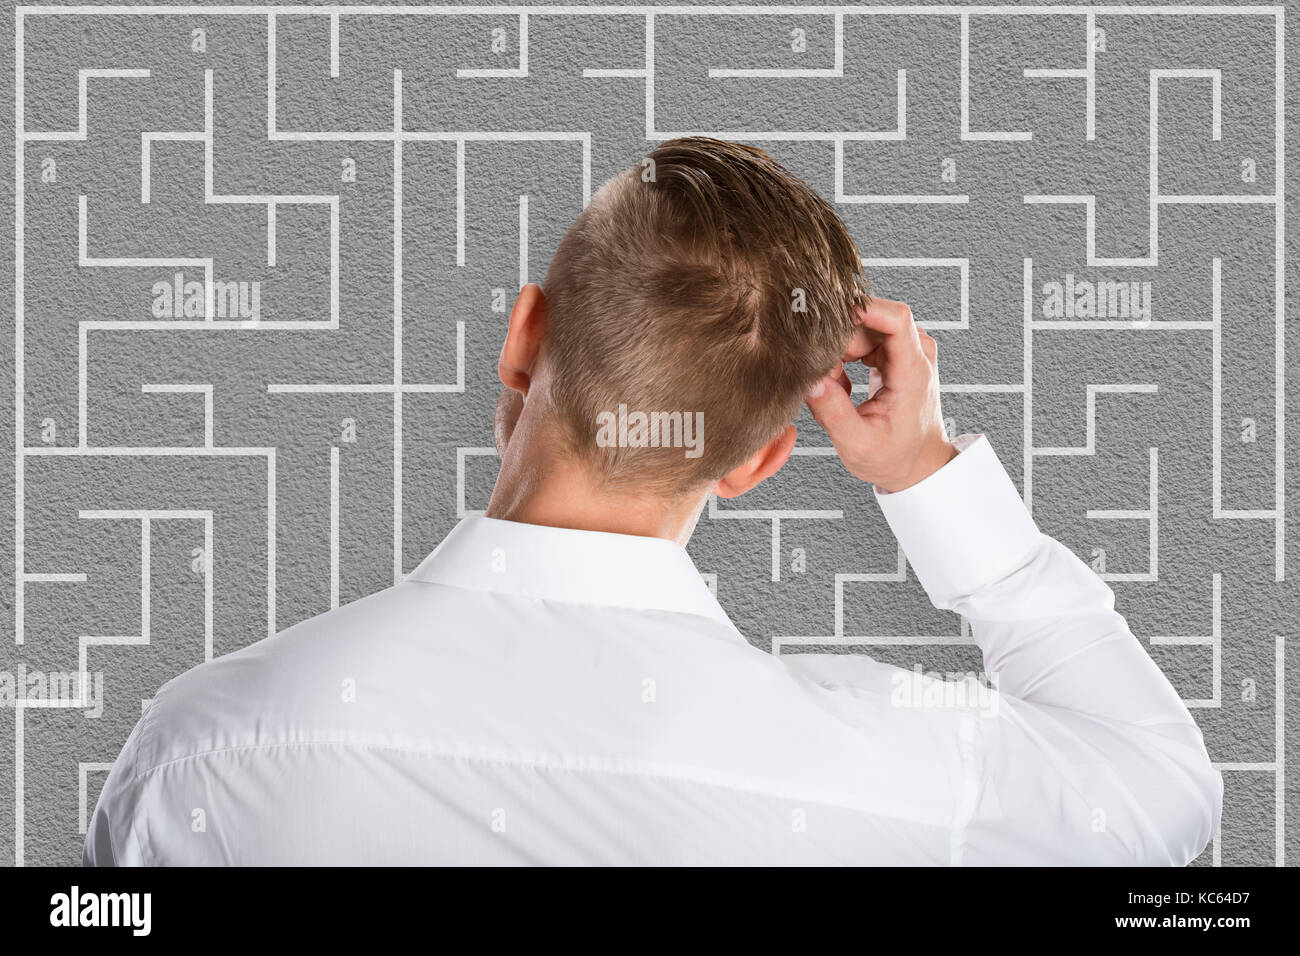 Confused Young Businessman Looking At Labyrinth Trying To Solve Business Puzzle Stock Photo